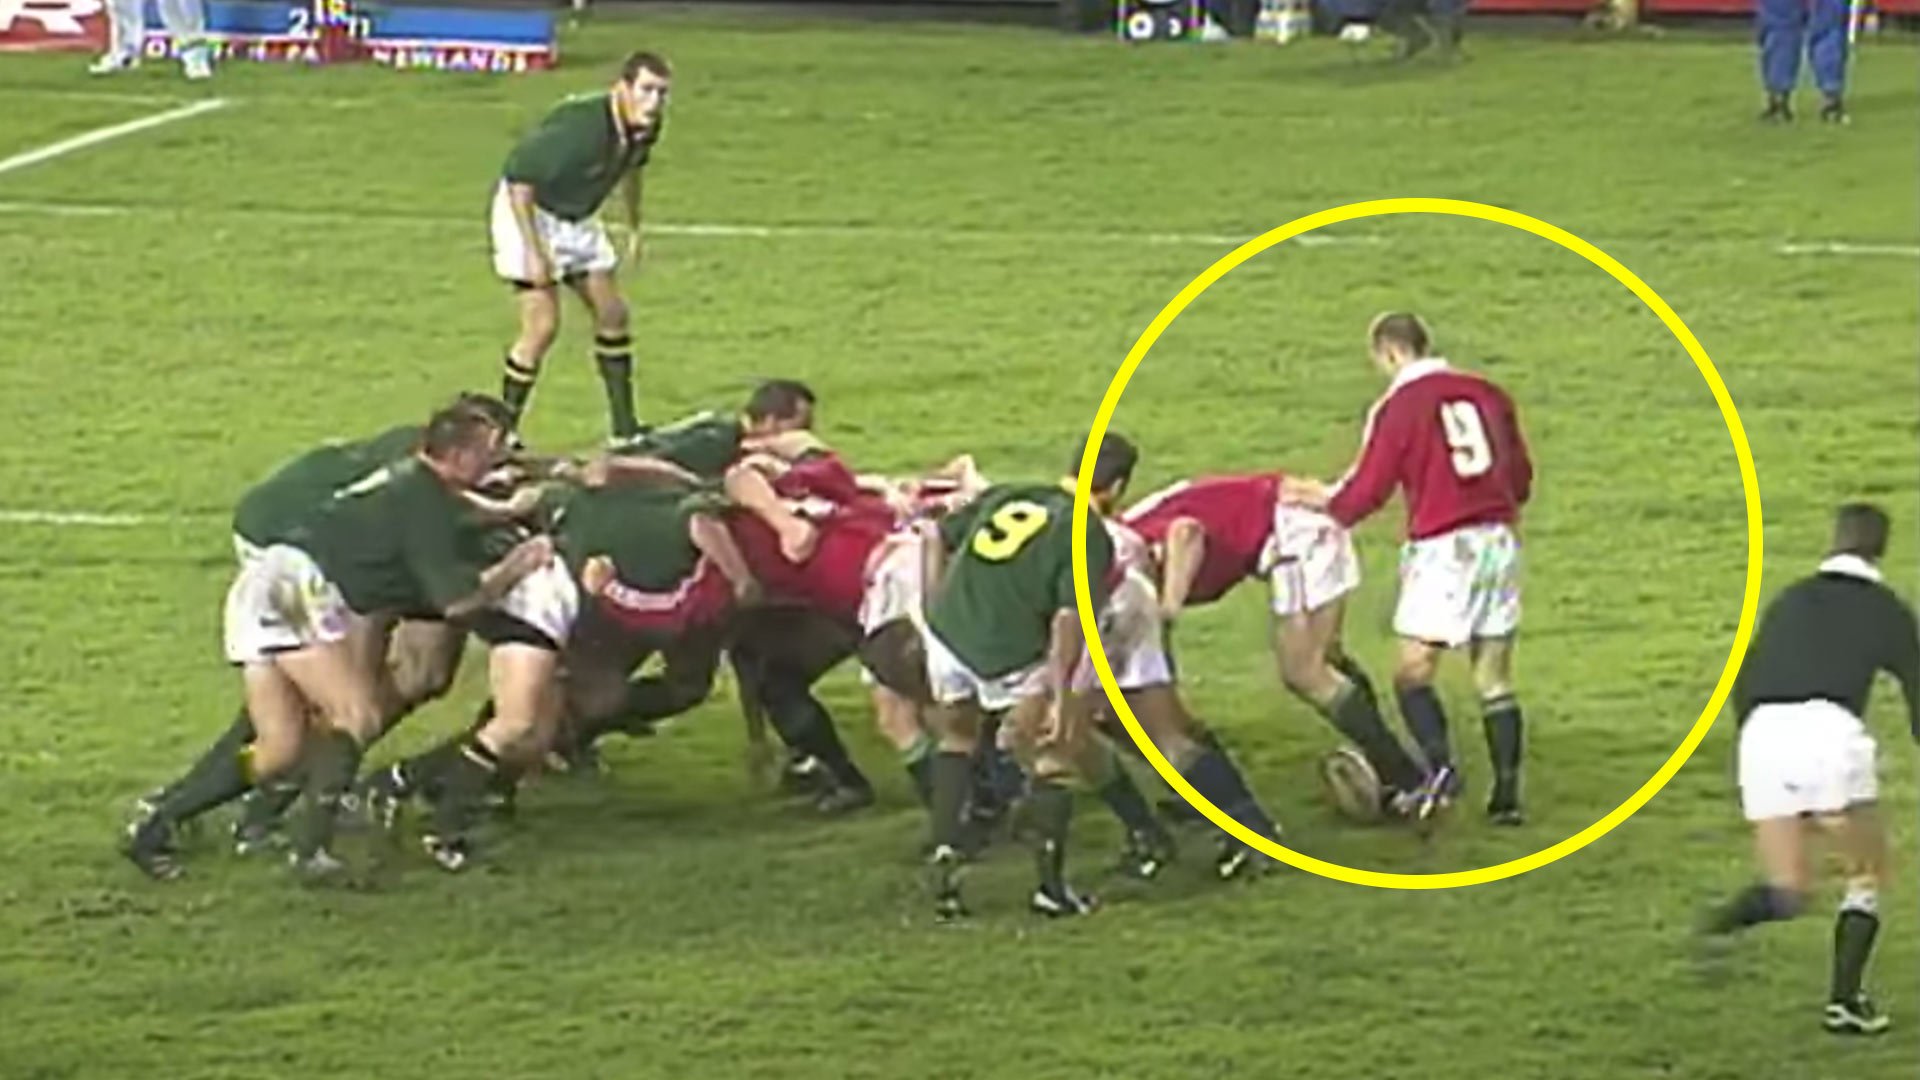 Footage is released showing the time when Matt Dawson humiliated the Springboks with one pass